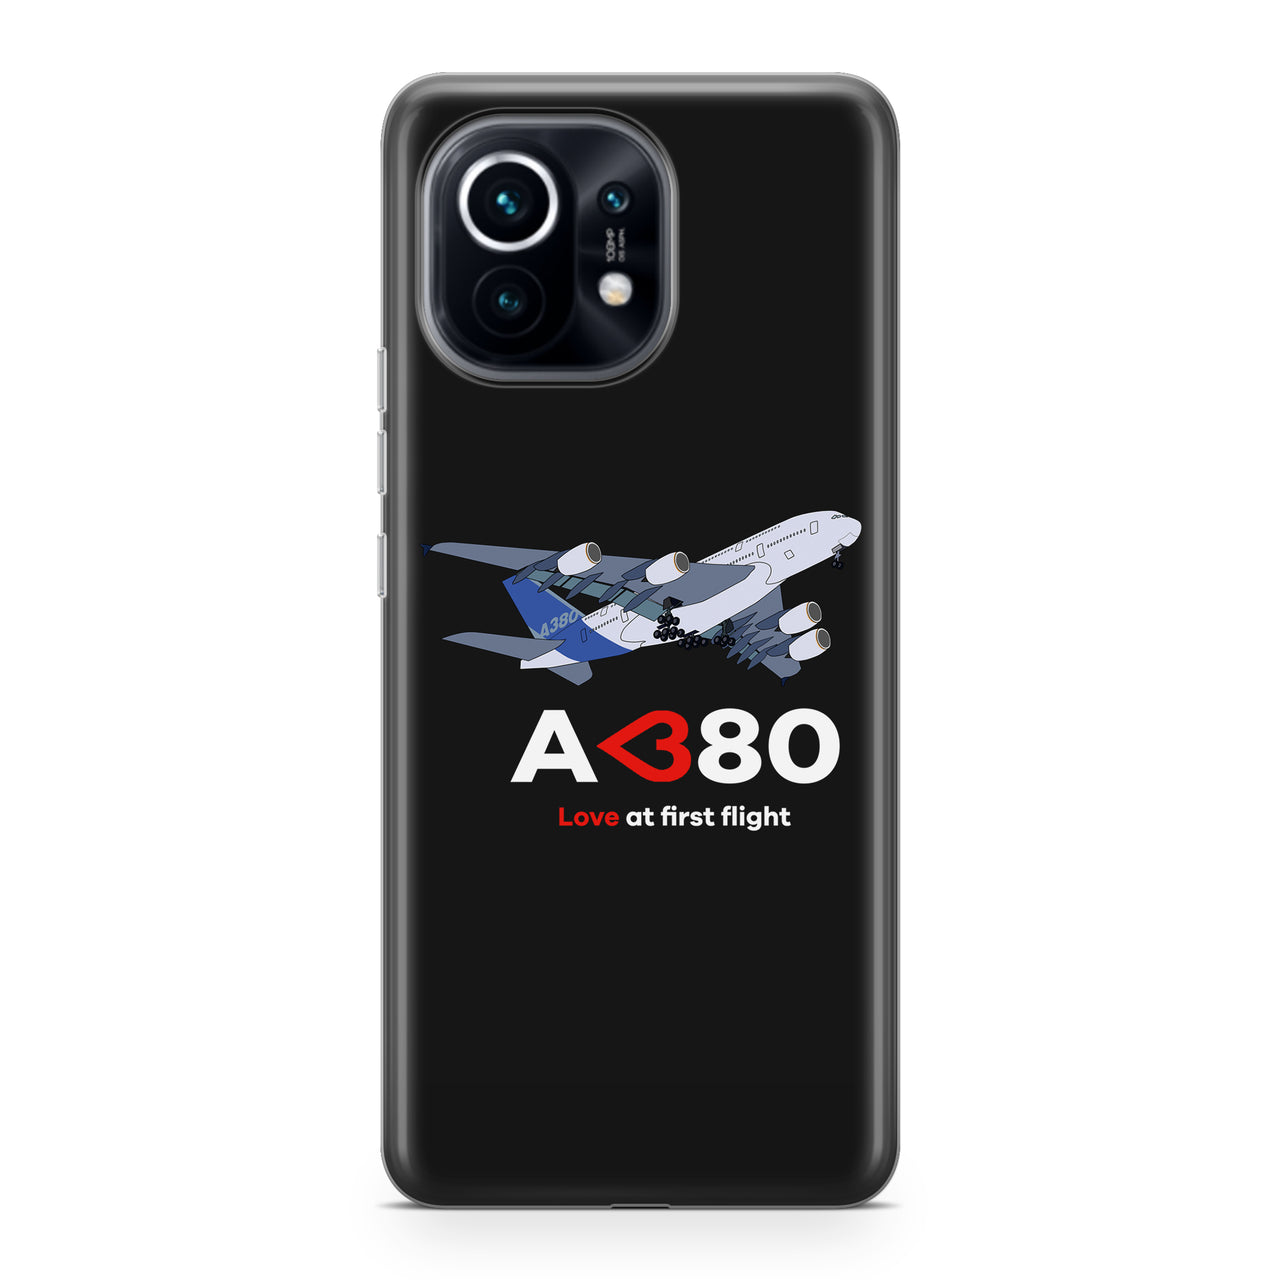 Airbus A380 Love at first flight Designed Xiaomi Cases